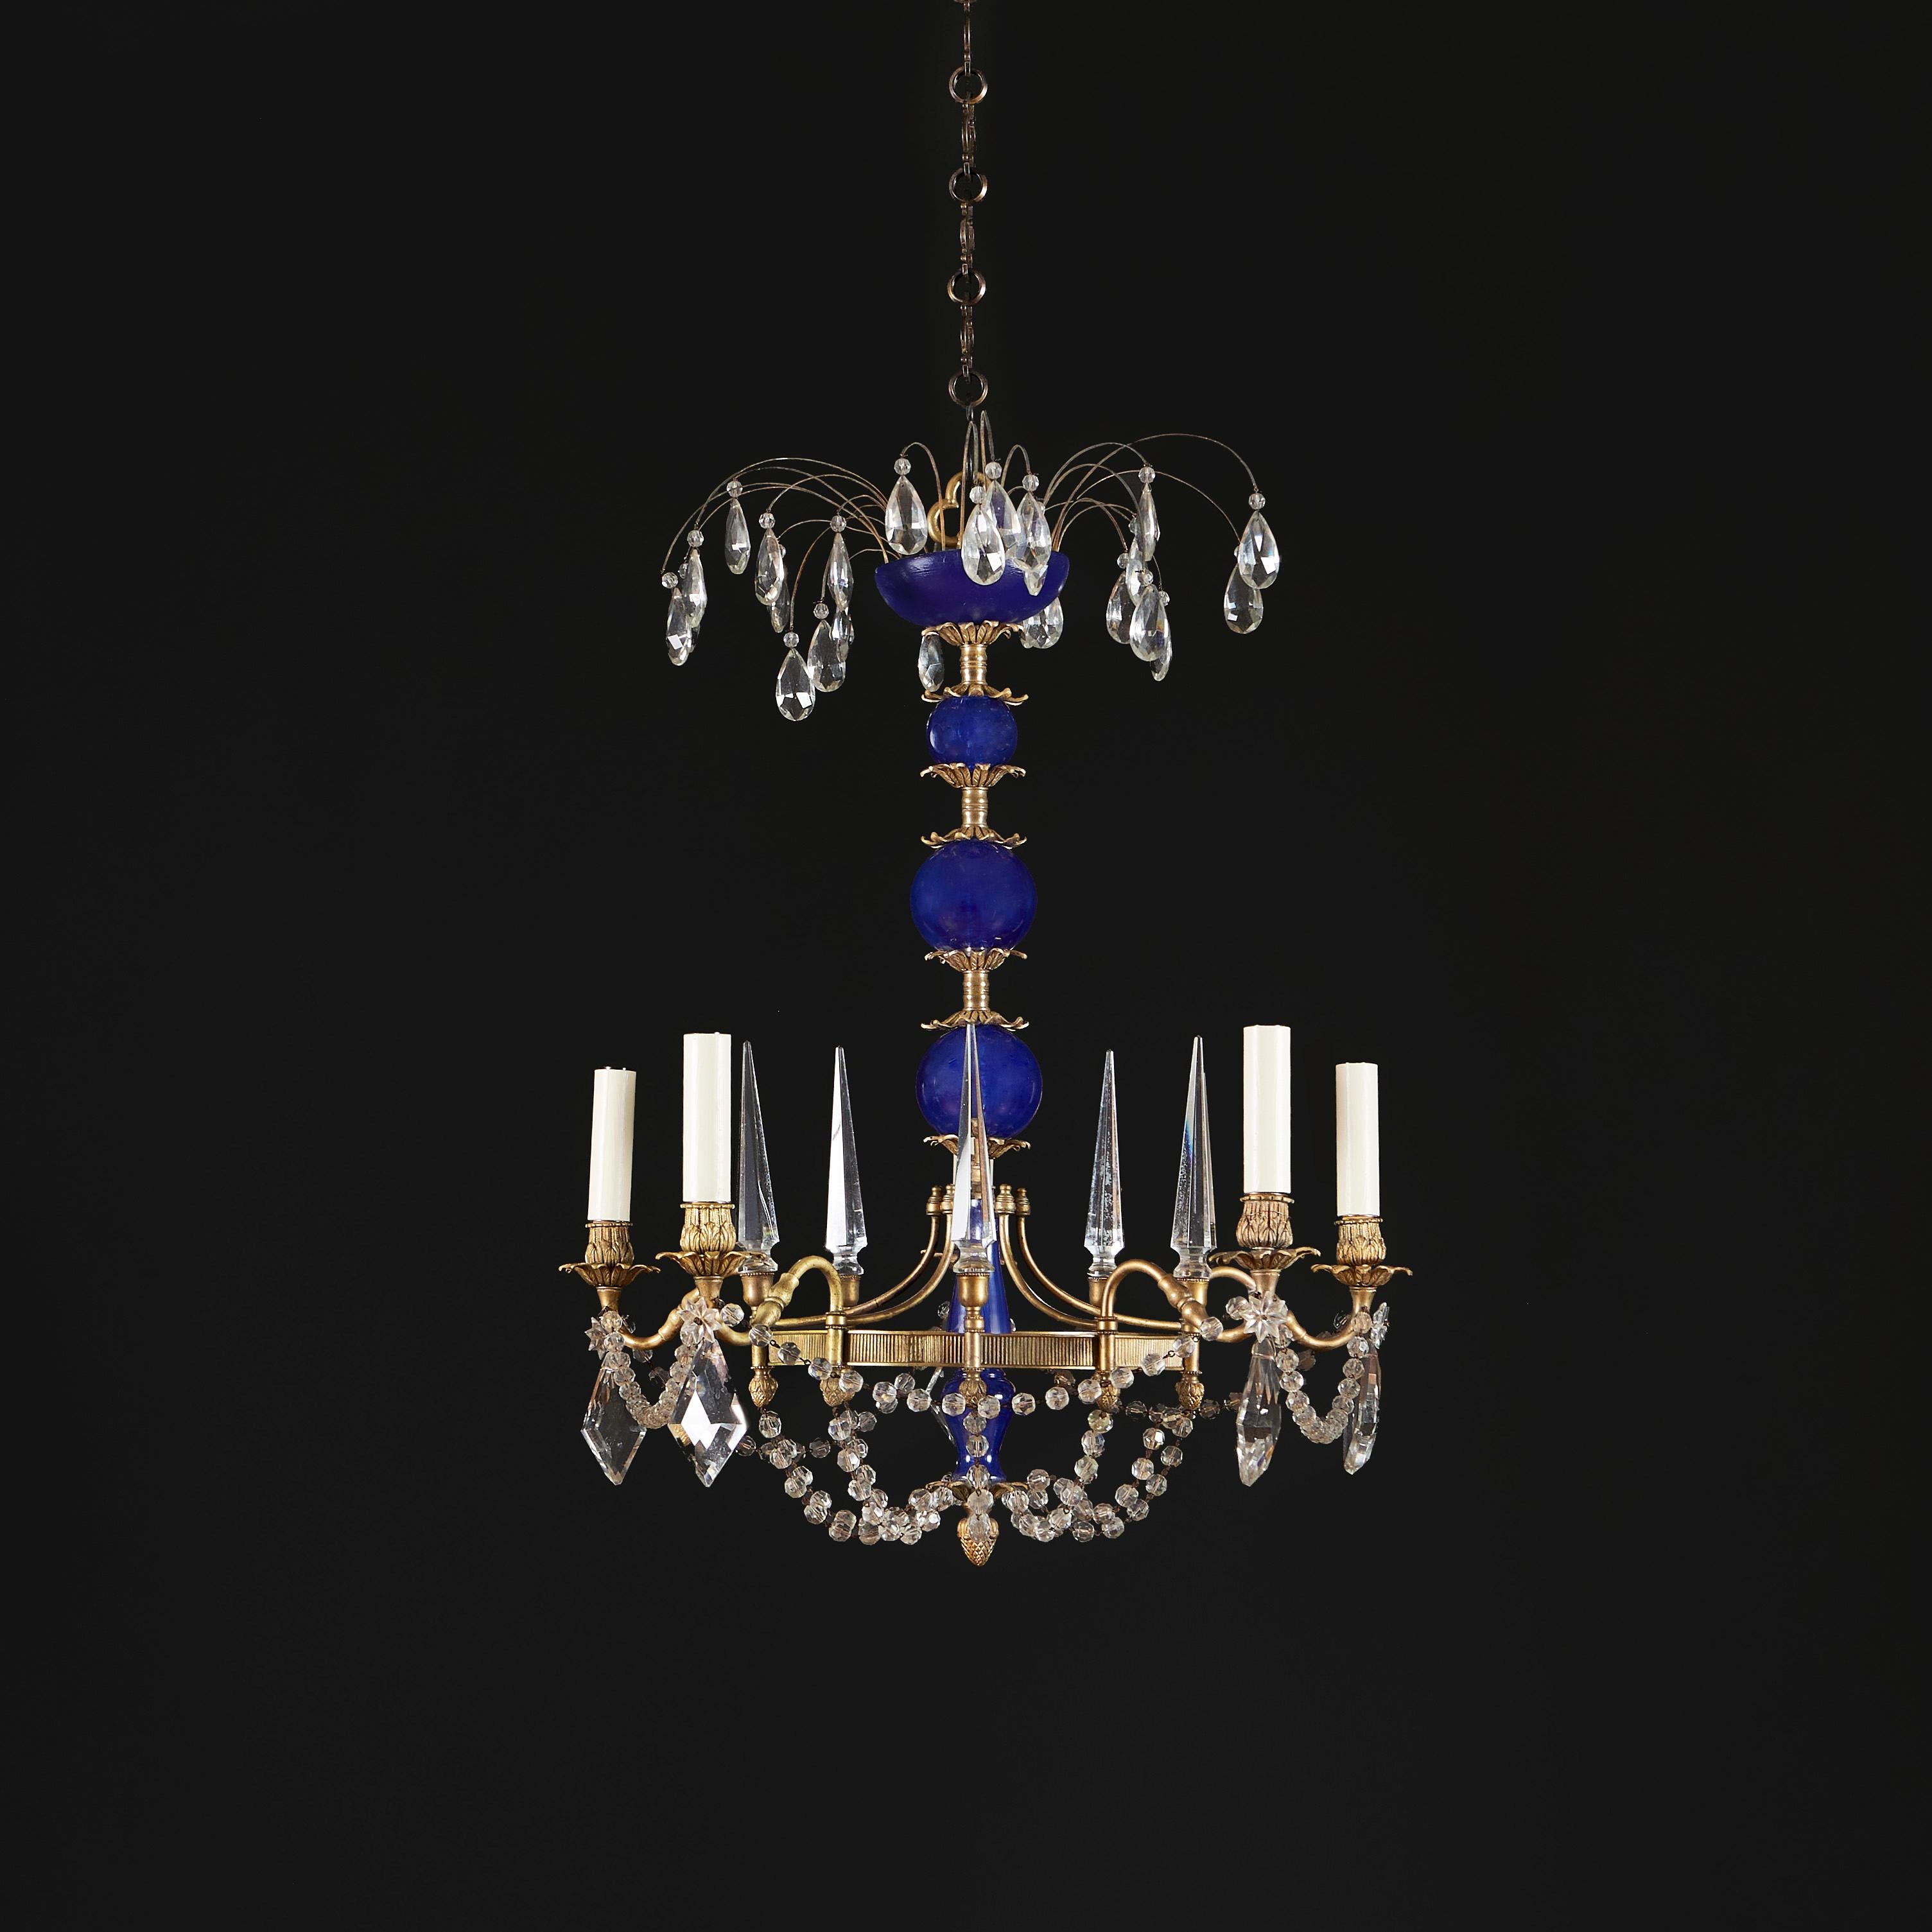 Russia, circa 1830

A fine early nineteenth century chandelier with five cylindrical blue glass beads, with tear drop mounts, with five arms with ormolu drip trays and five clear glass obelisks, the stem terminating at the base in a chased ormolu